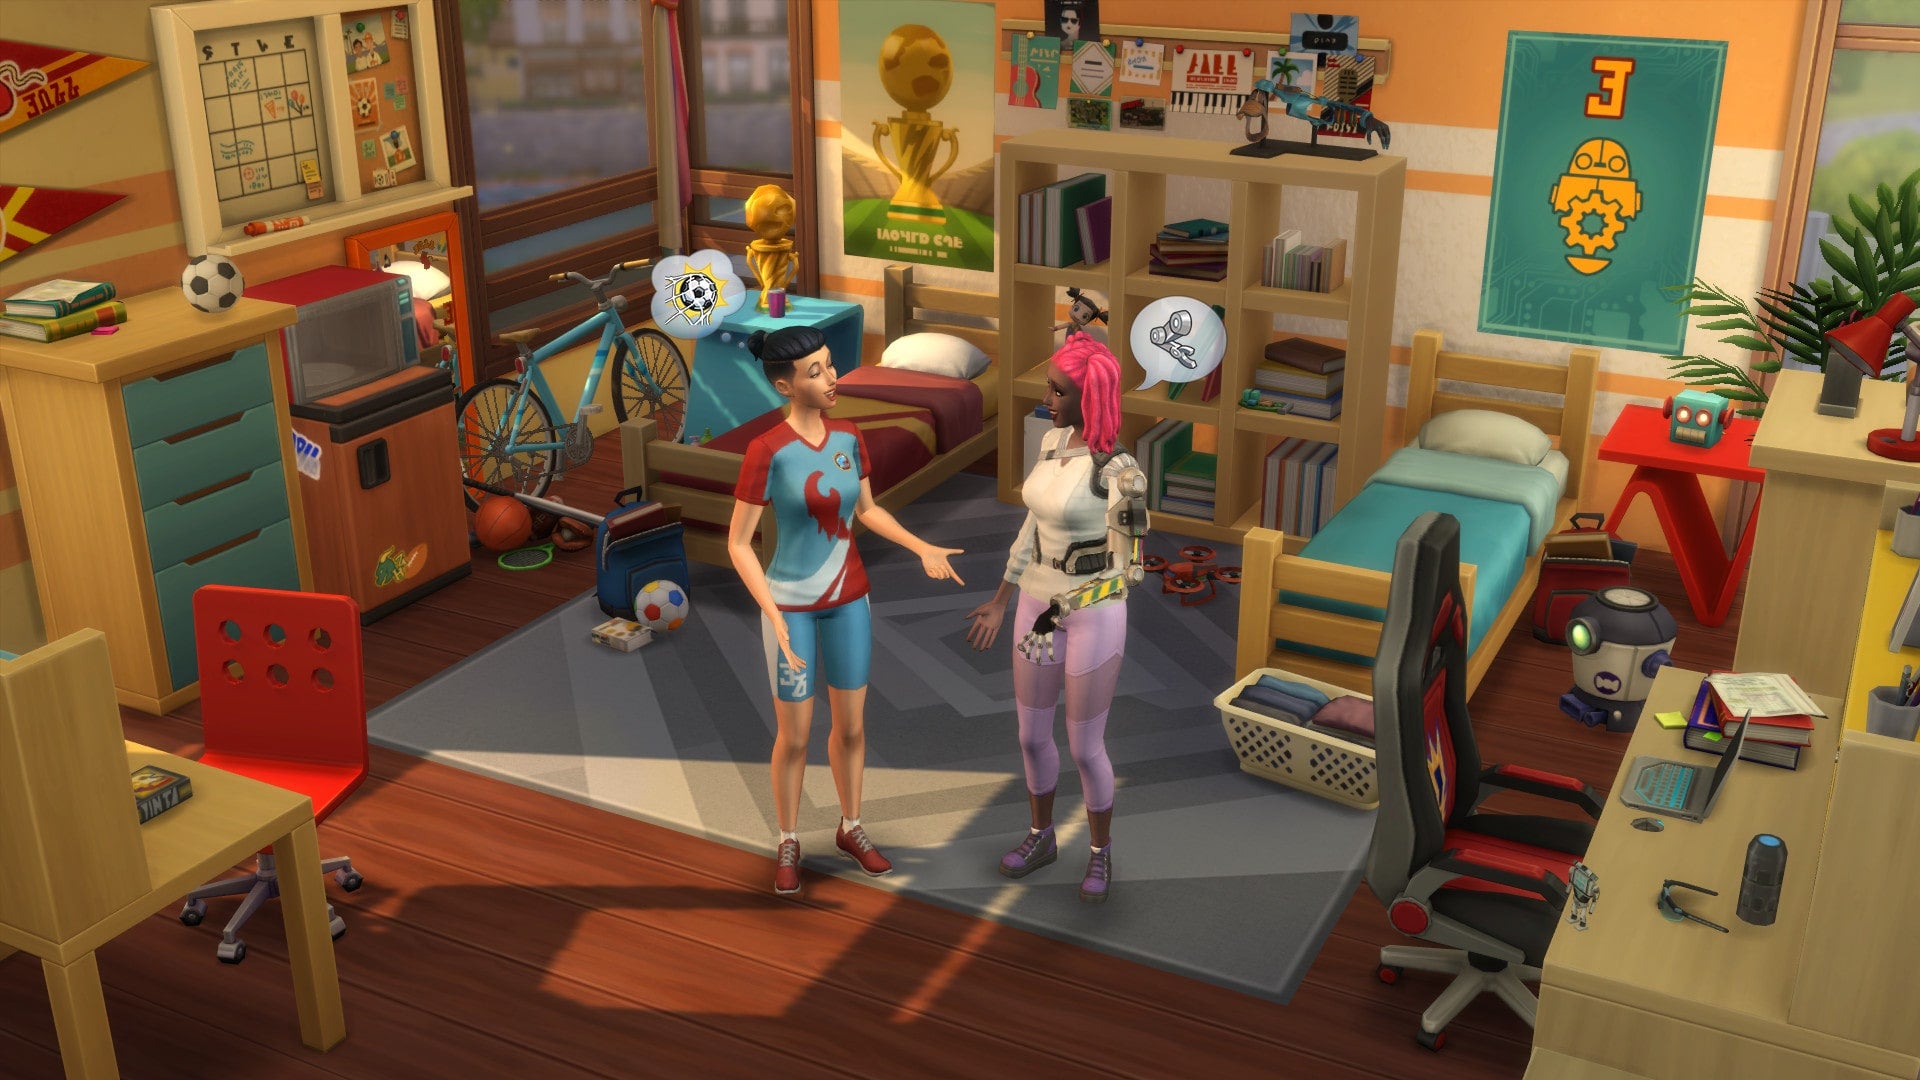 Play The Sims 4 free for 48 hours on Origin – Destructoid